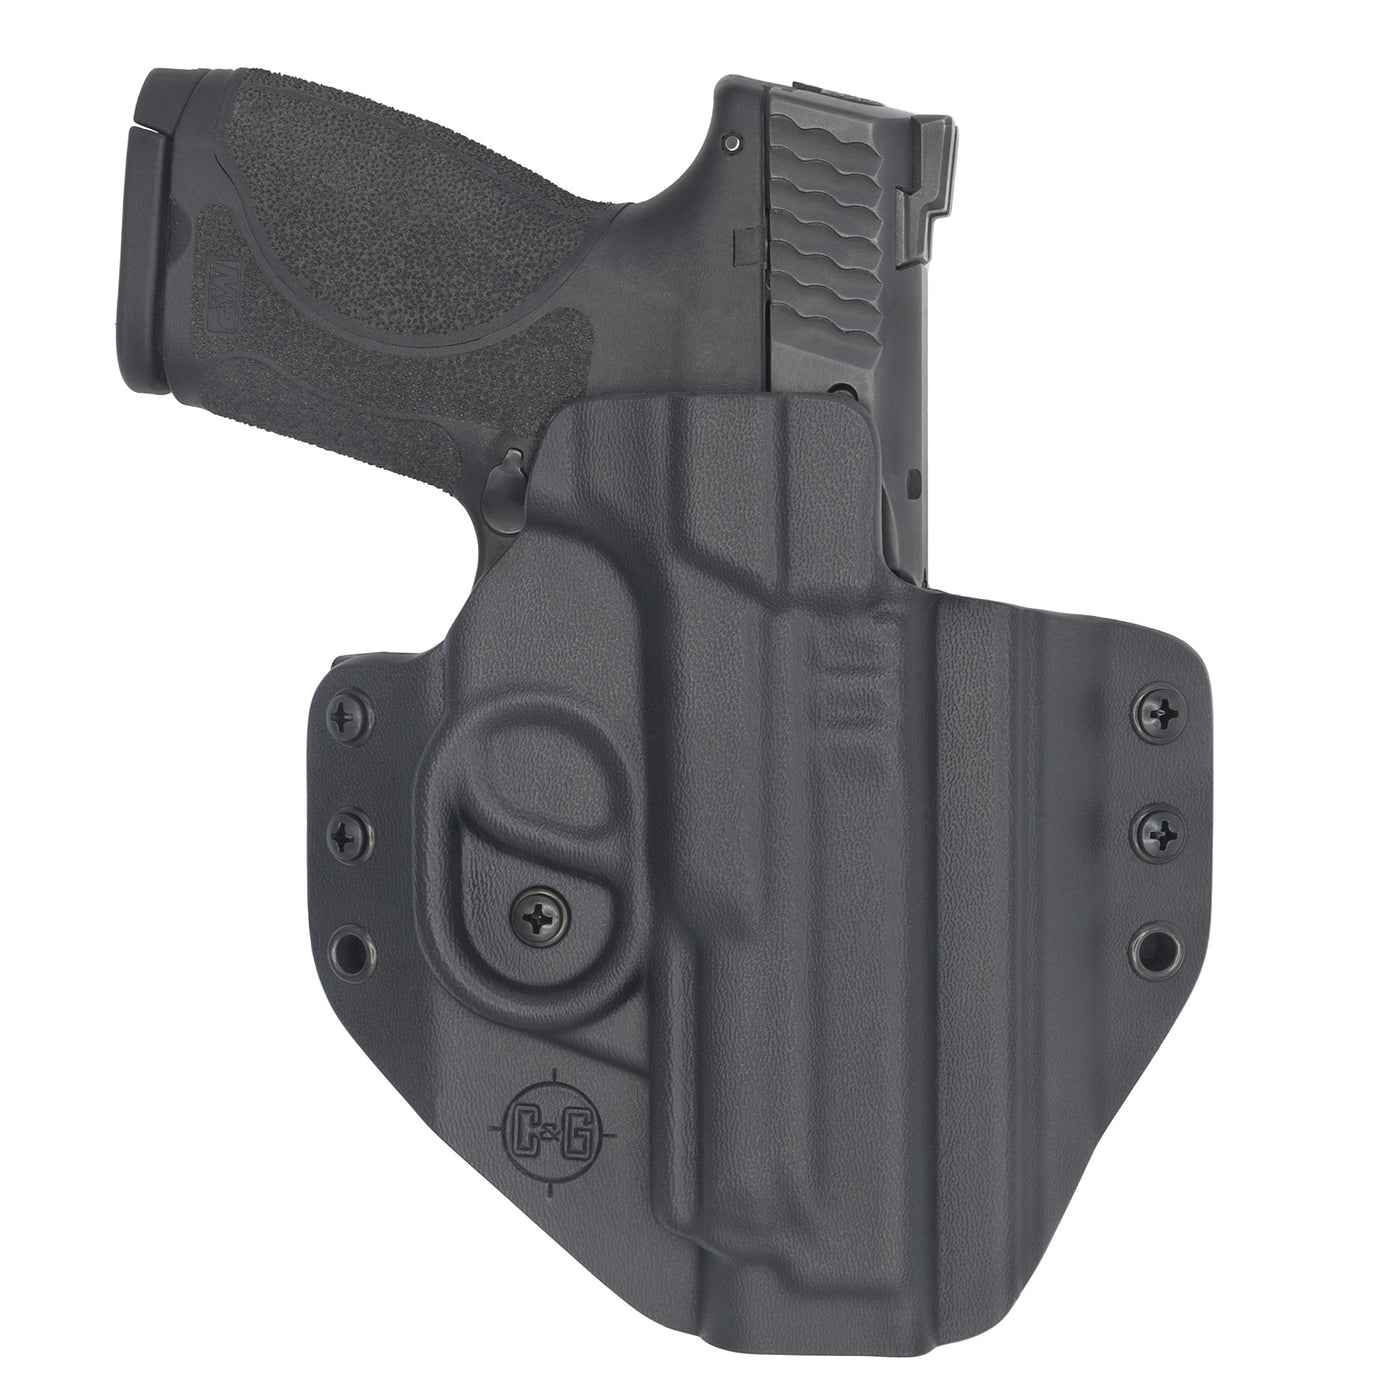 C&G Holsters custom Covert OWB kydex holster for Smith & Wesson M&P 2.0 9/40 4.25" in holstered position